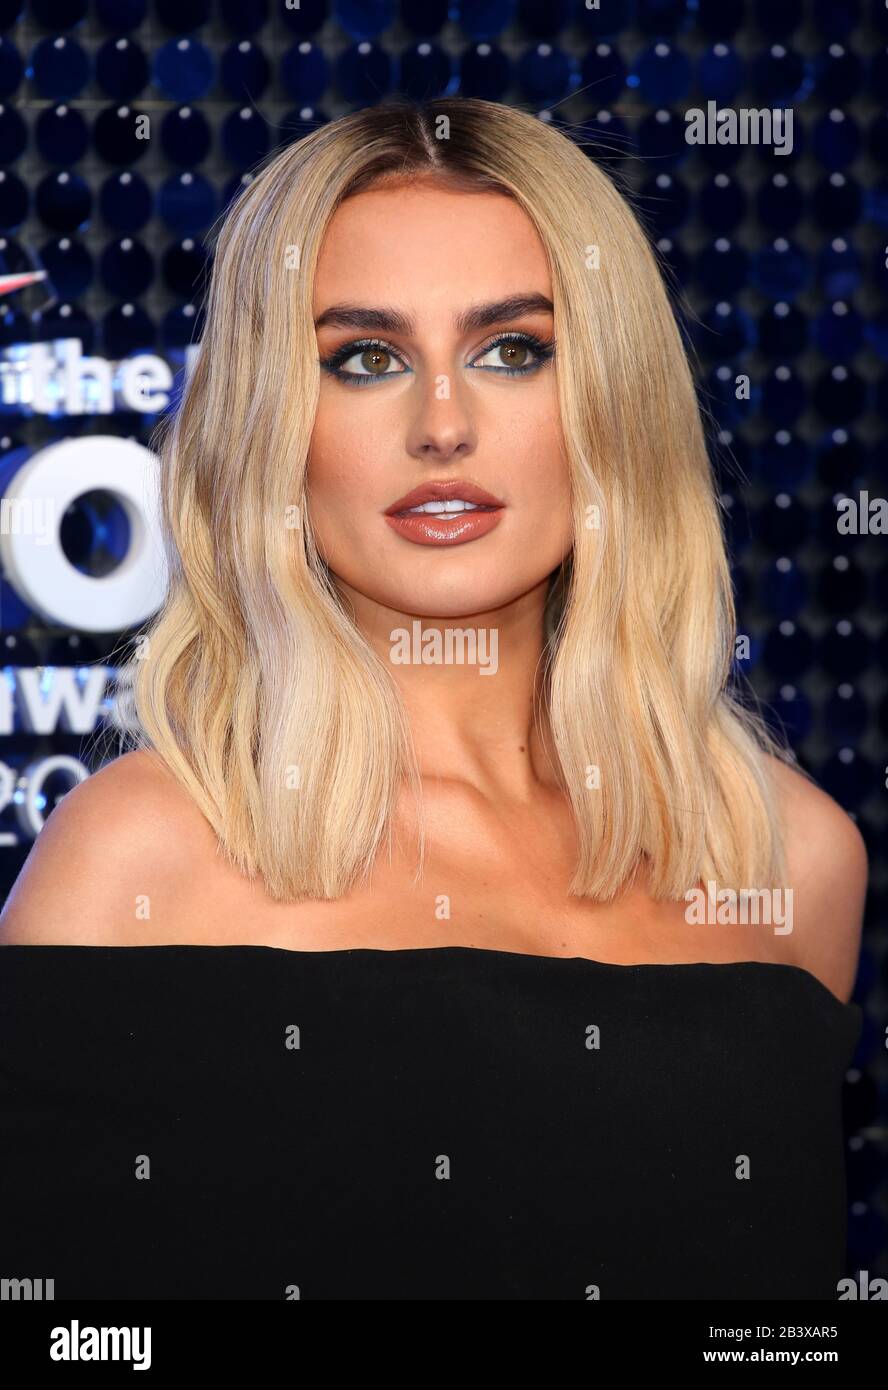 Amber Davies attends The Global Awards 2020 with Very.co.uk at London's Eventim Apollo Hammersmith. Stock Photo